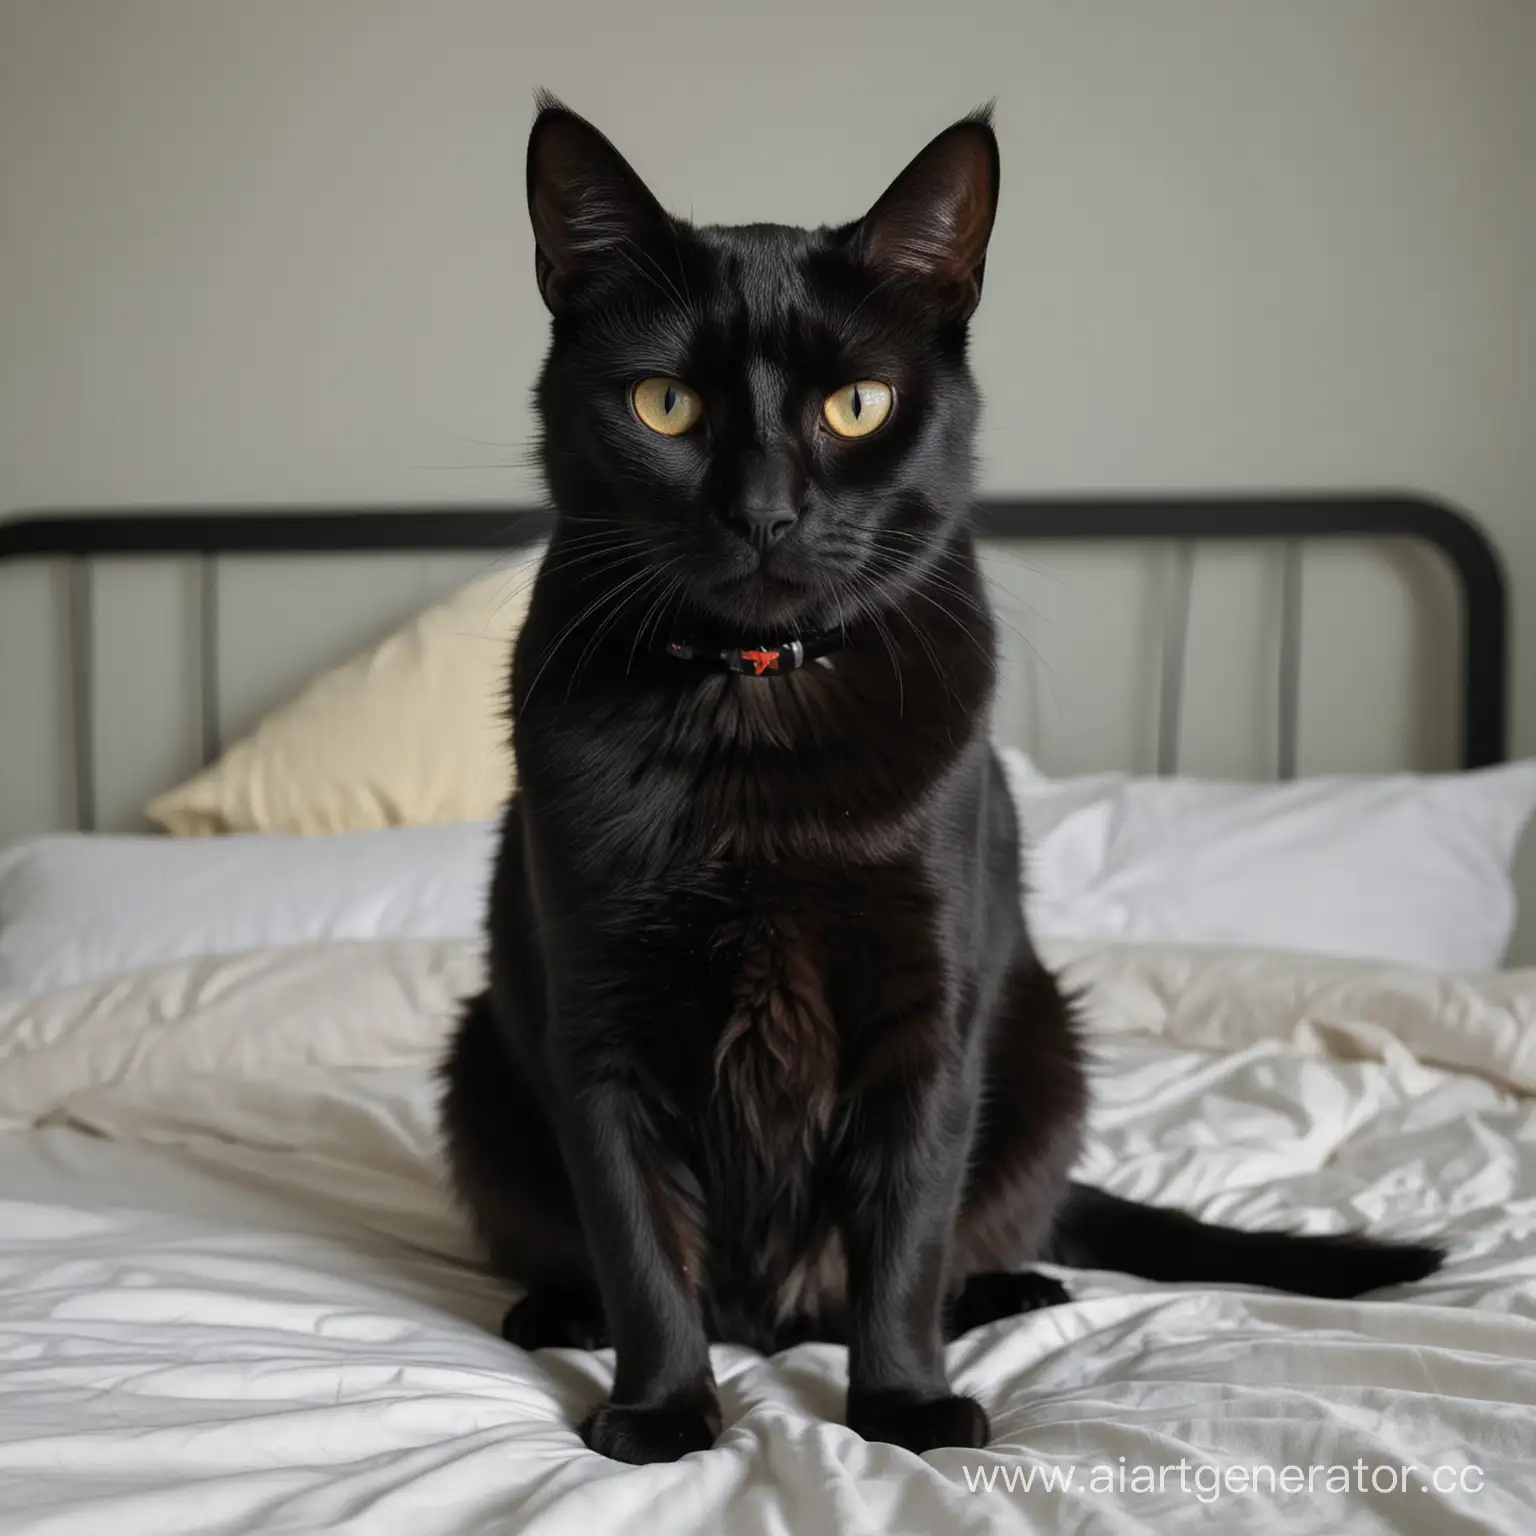 Mysterious-Black-Cat-with-Injured-Eye-on-Bed